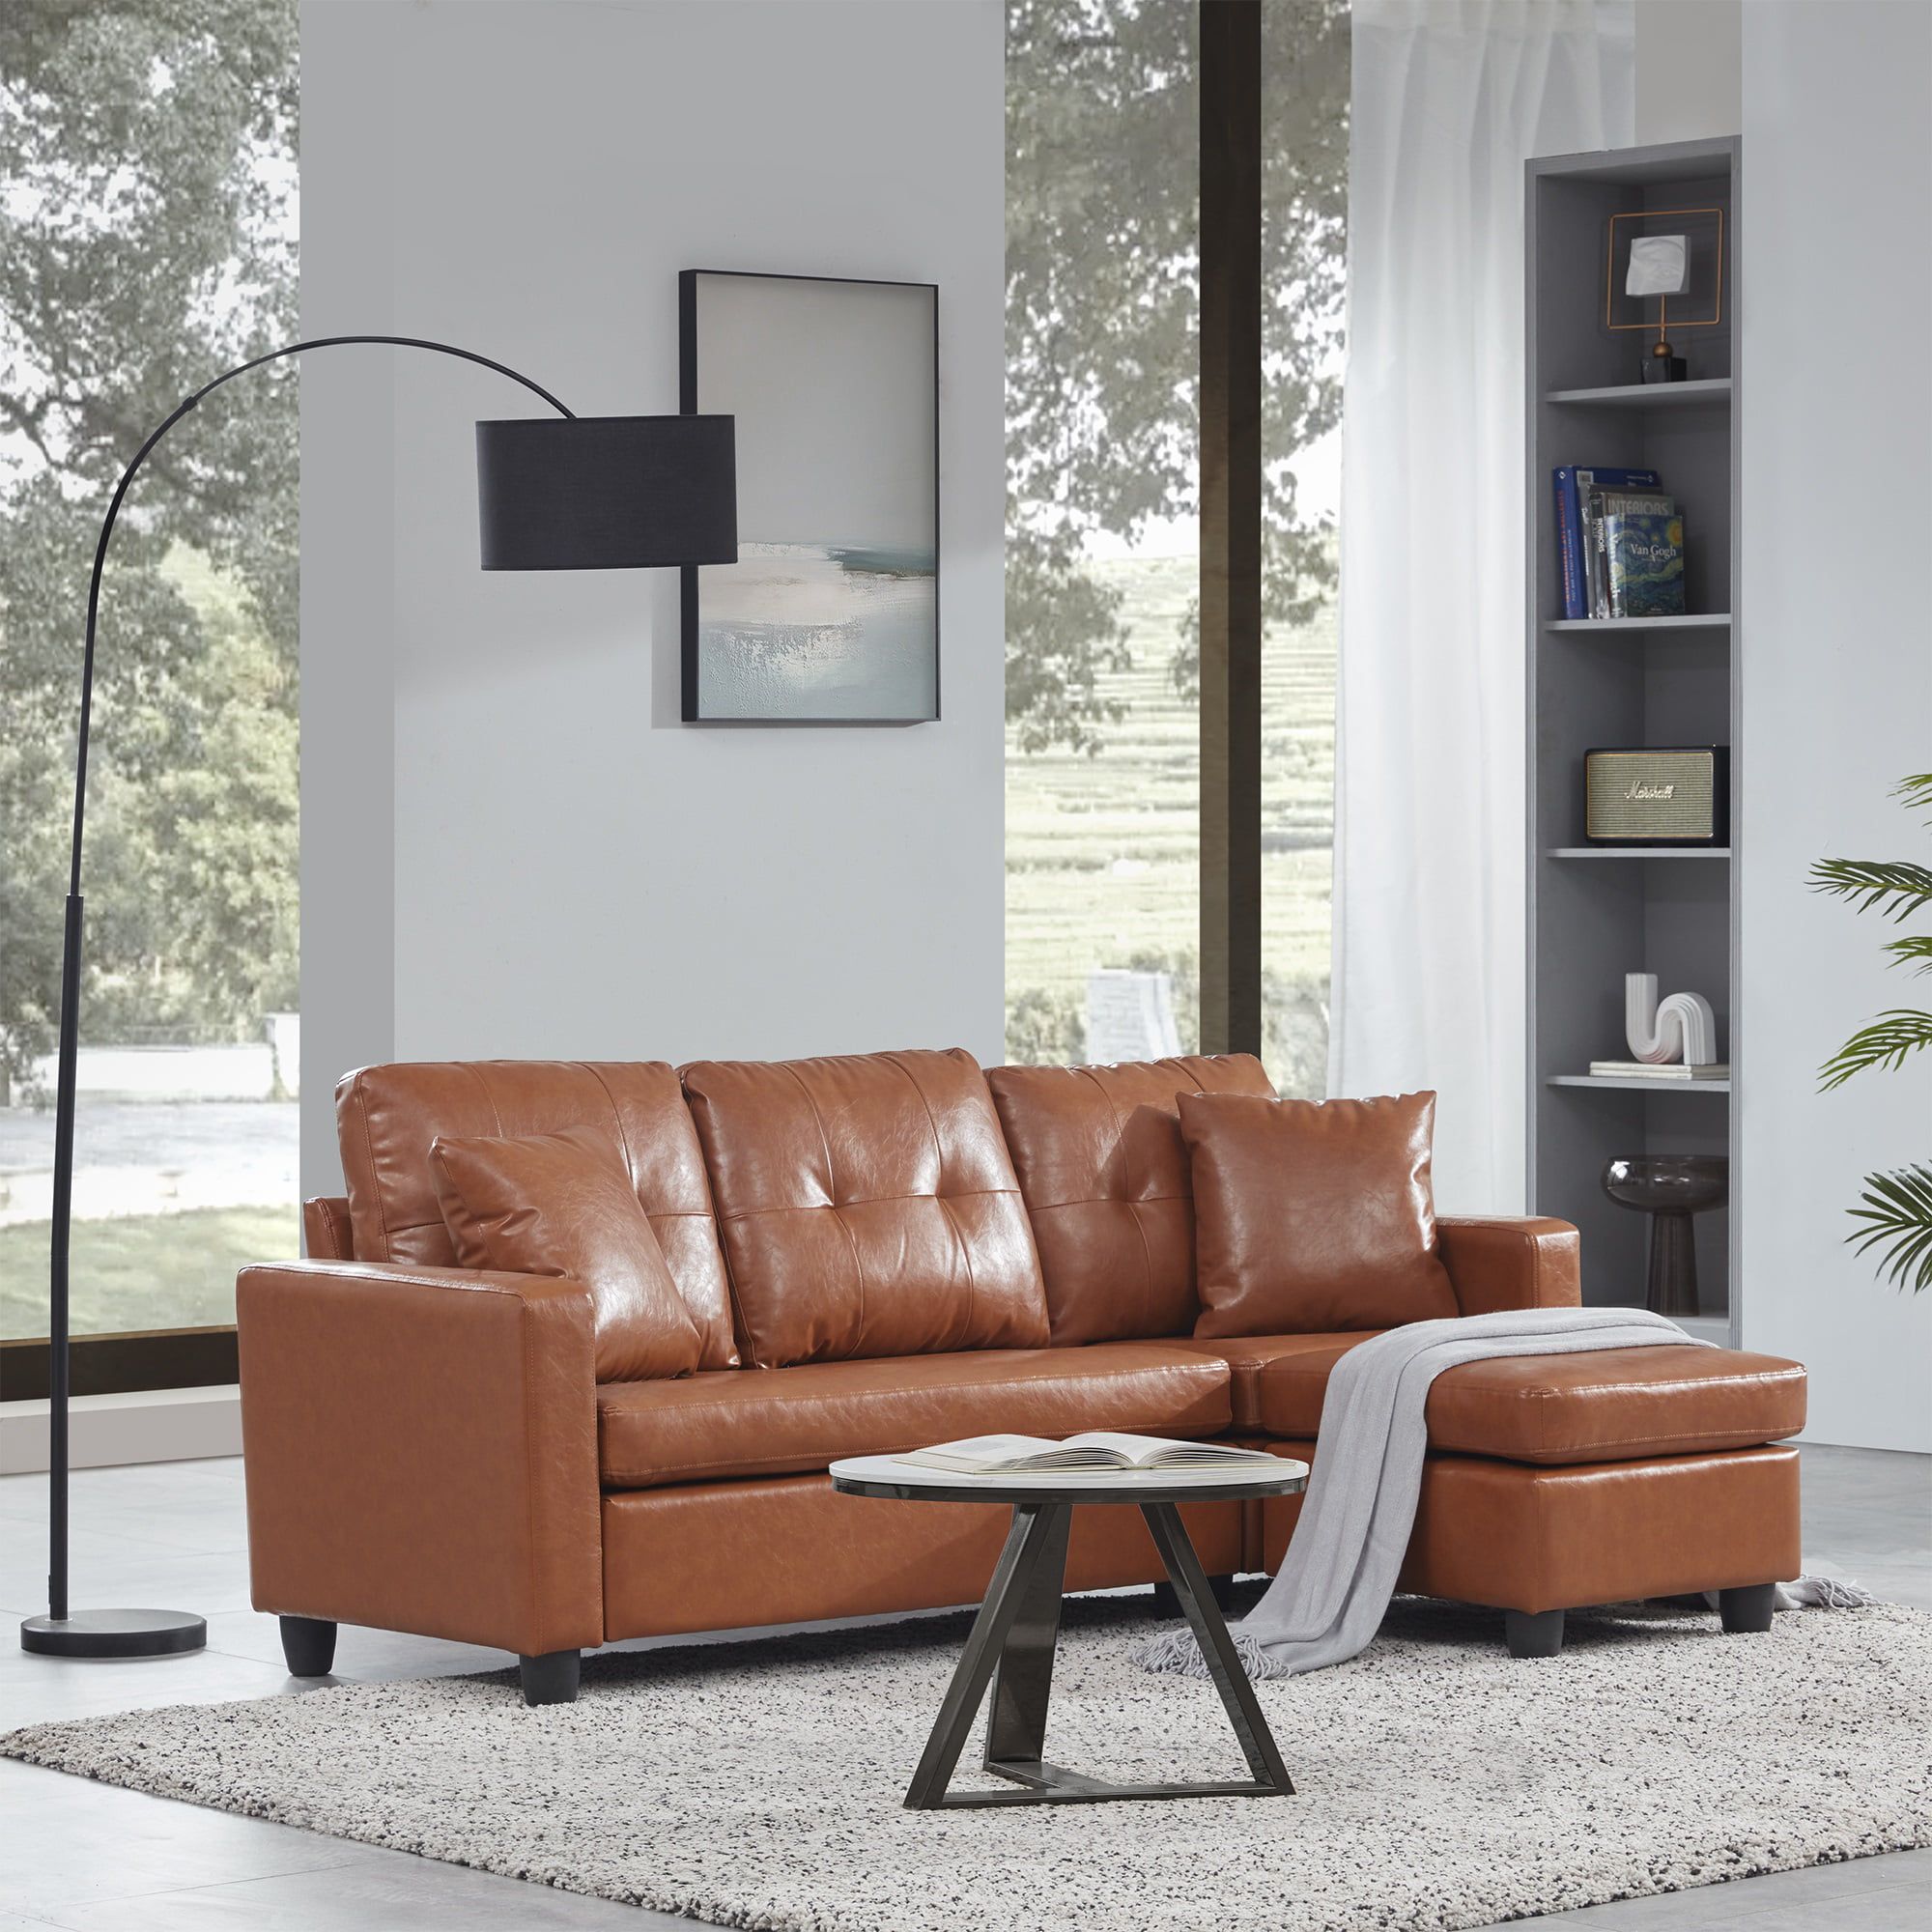 Belleze Altera Convertible Sectional Sofa, Modern Faux Leather L Shaped Couch  3 Seat With Reversible Chaise For Small Space, Caramel – Walmart Within 3 Seat Convertible Sectional Sofas (Photo 8 of 15)